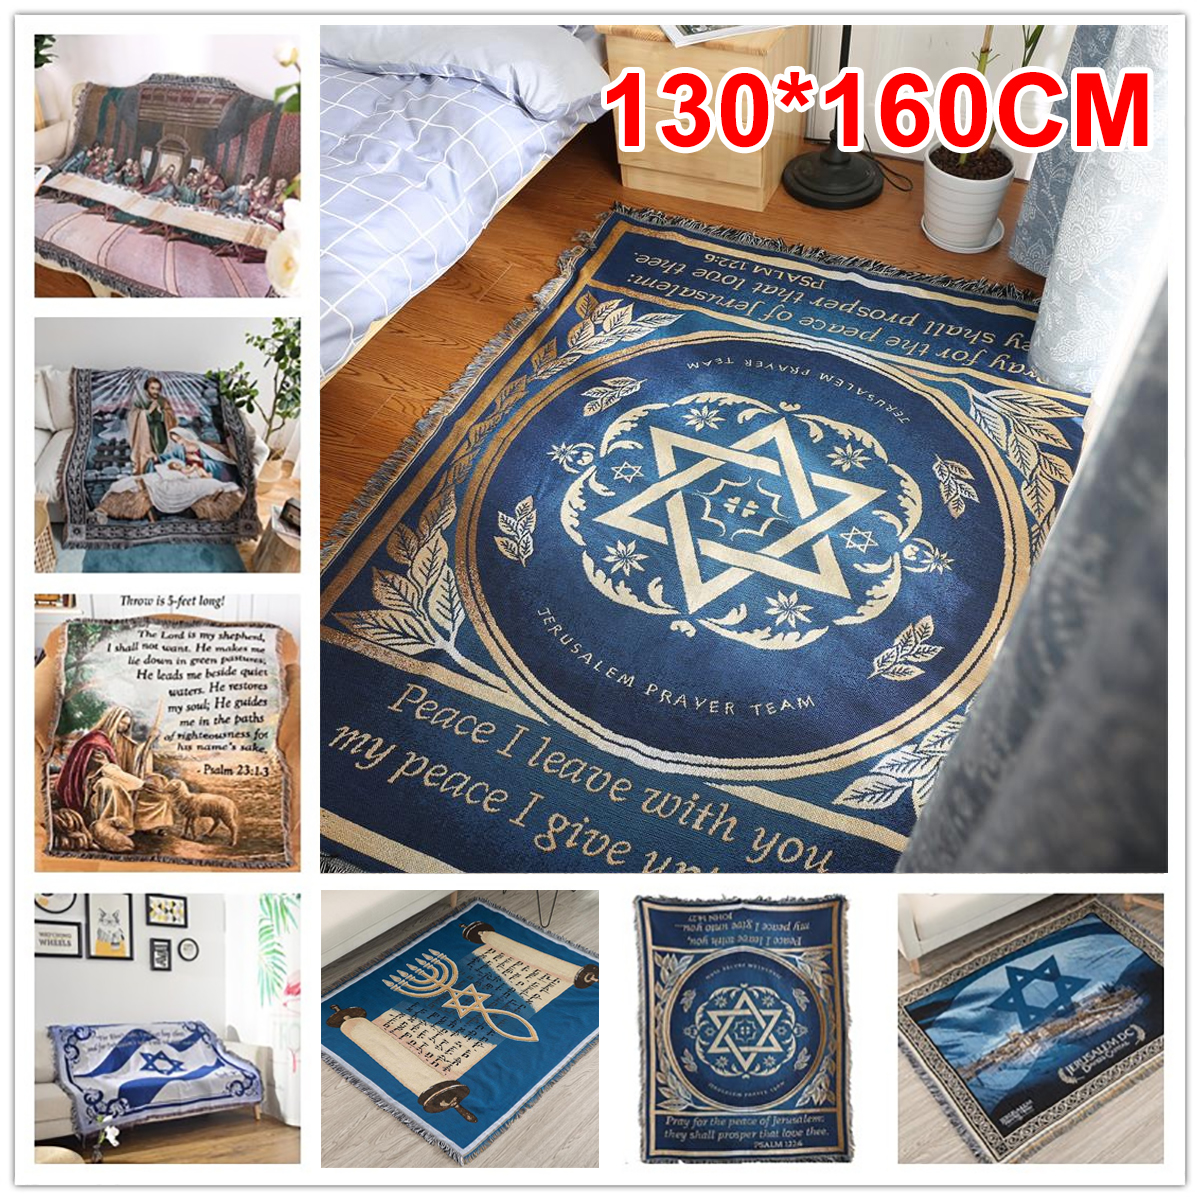 Folding-Decorative-Blanket-Knit-Tapestry-Prayer-Carpet-Middle-East-Sofa-Towel-for-Home-Textiles-1761320-1